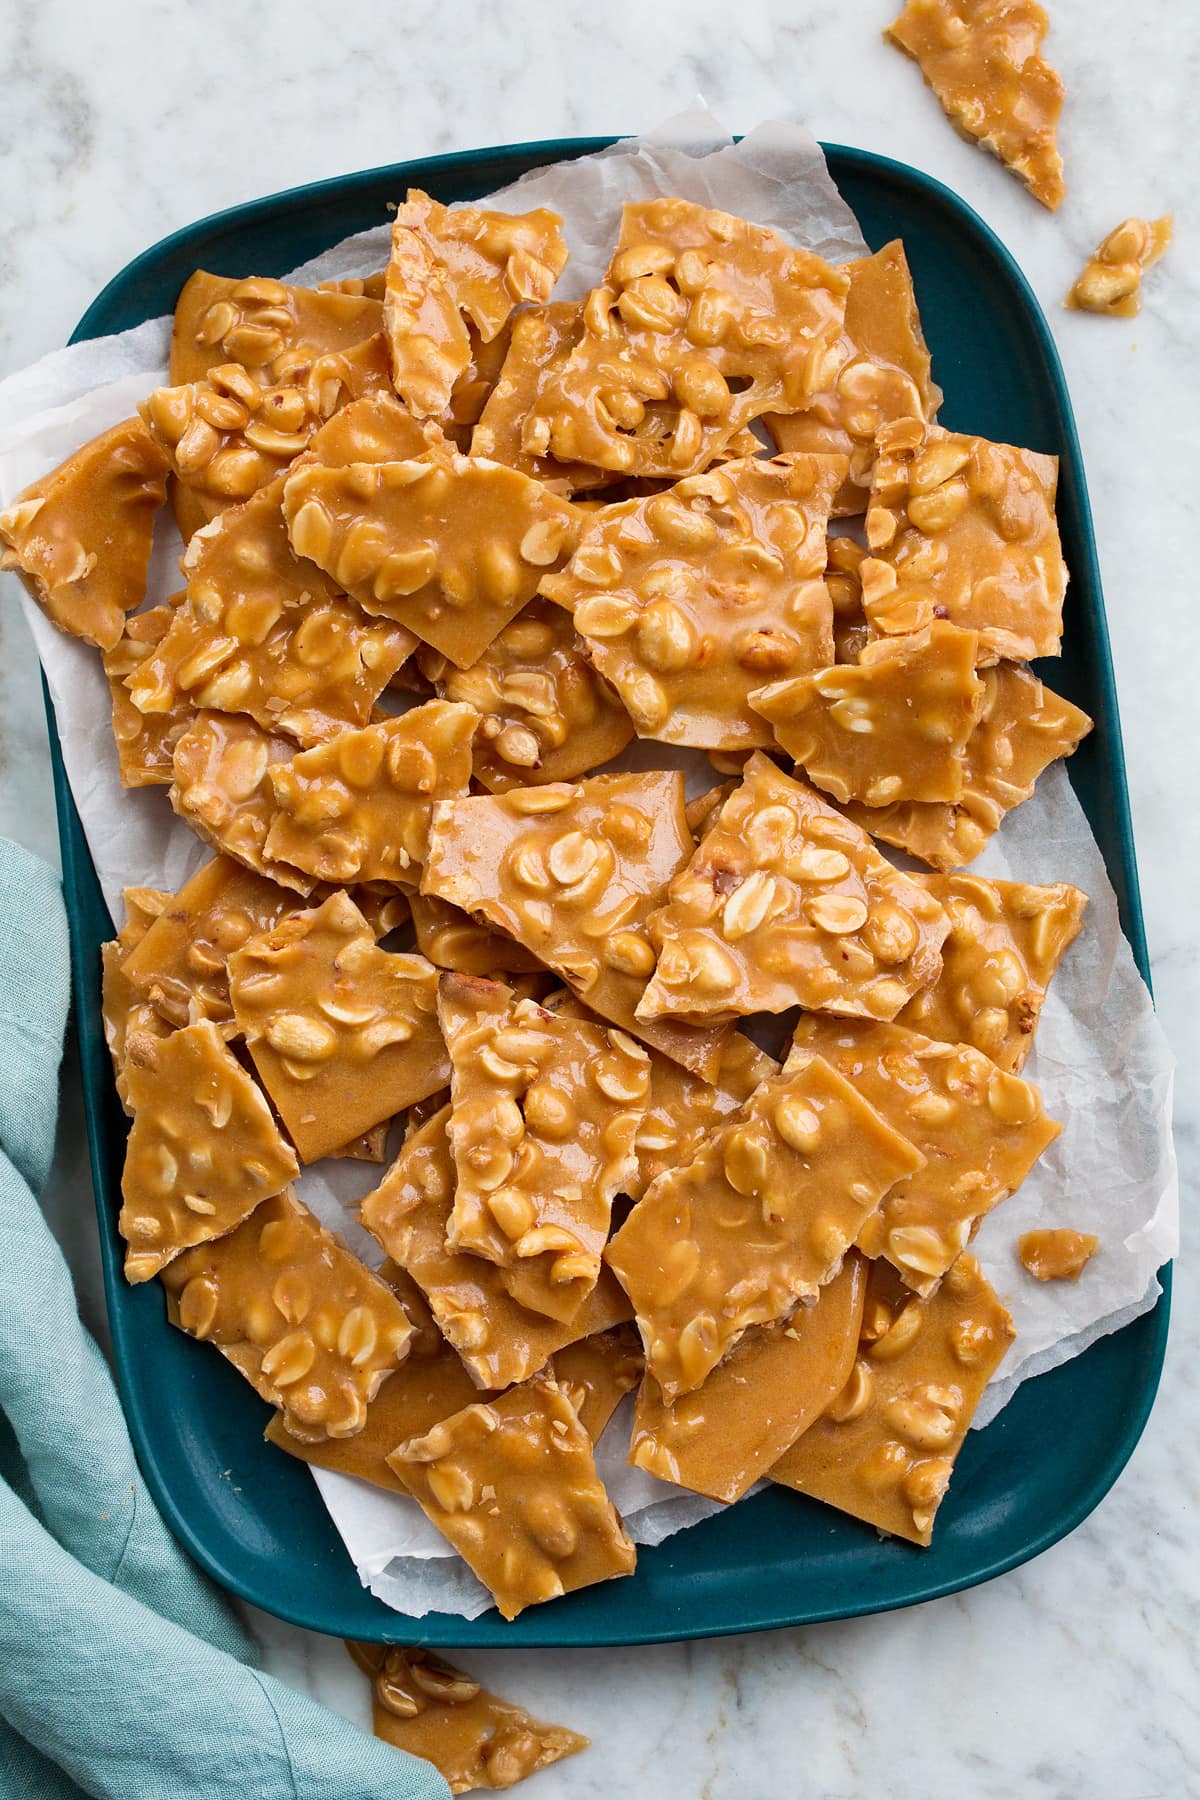 How Long Is Peanut Brittle Good For?